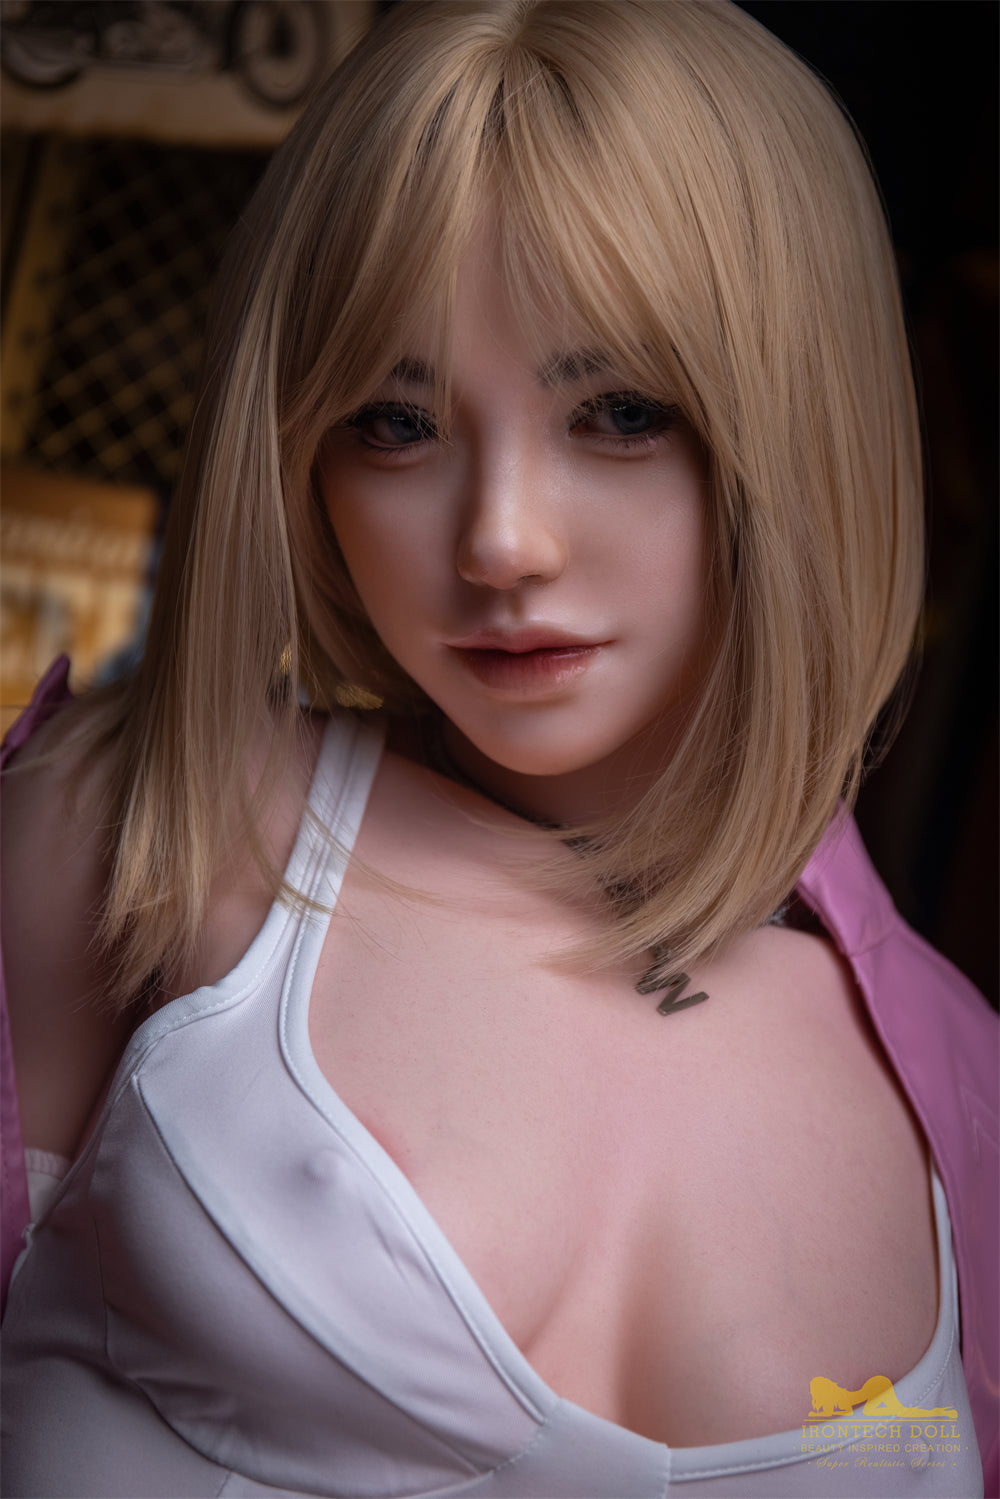 Irontechdoll Ruth 5ft54 / 169cm S39 Head Full Silicone Blonde Full Size Sex Doll